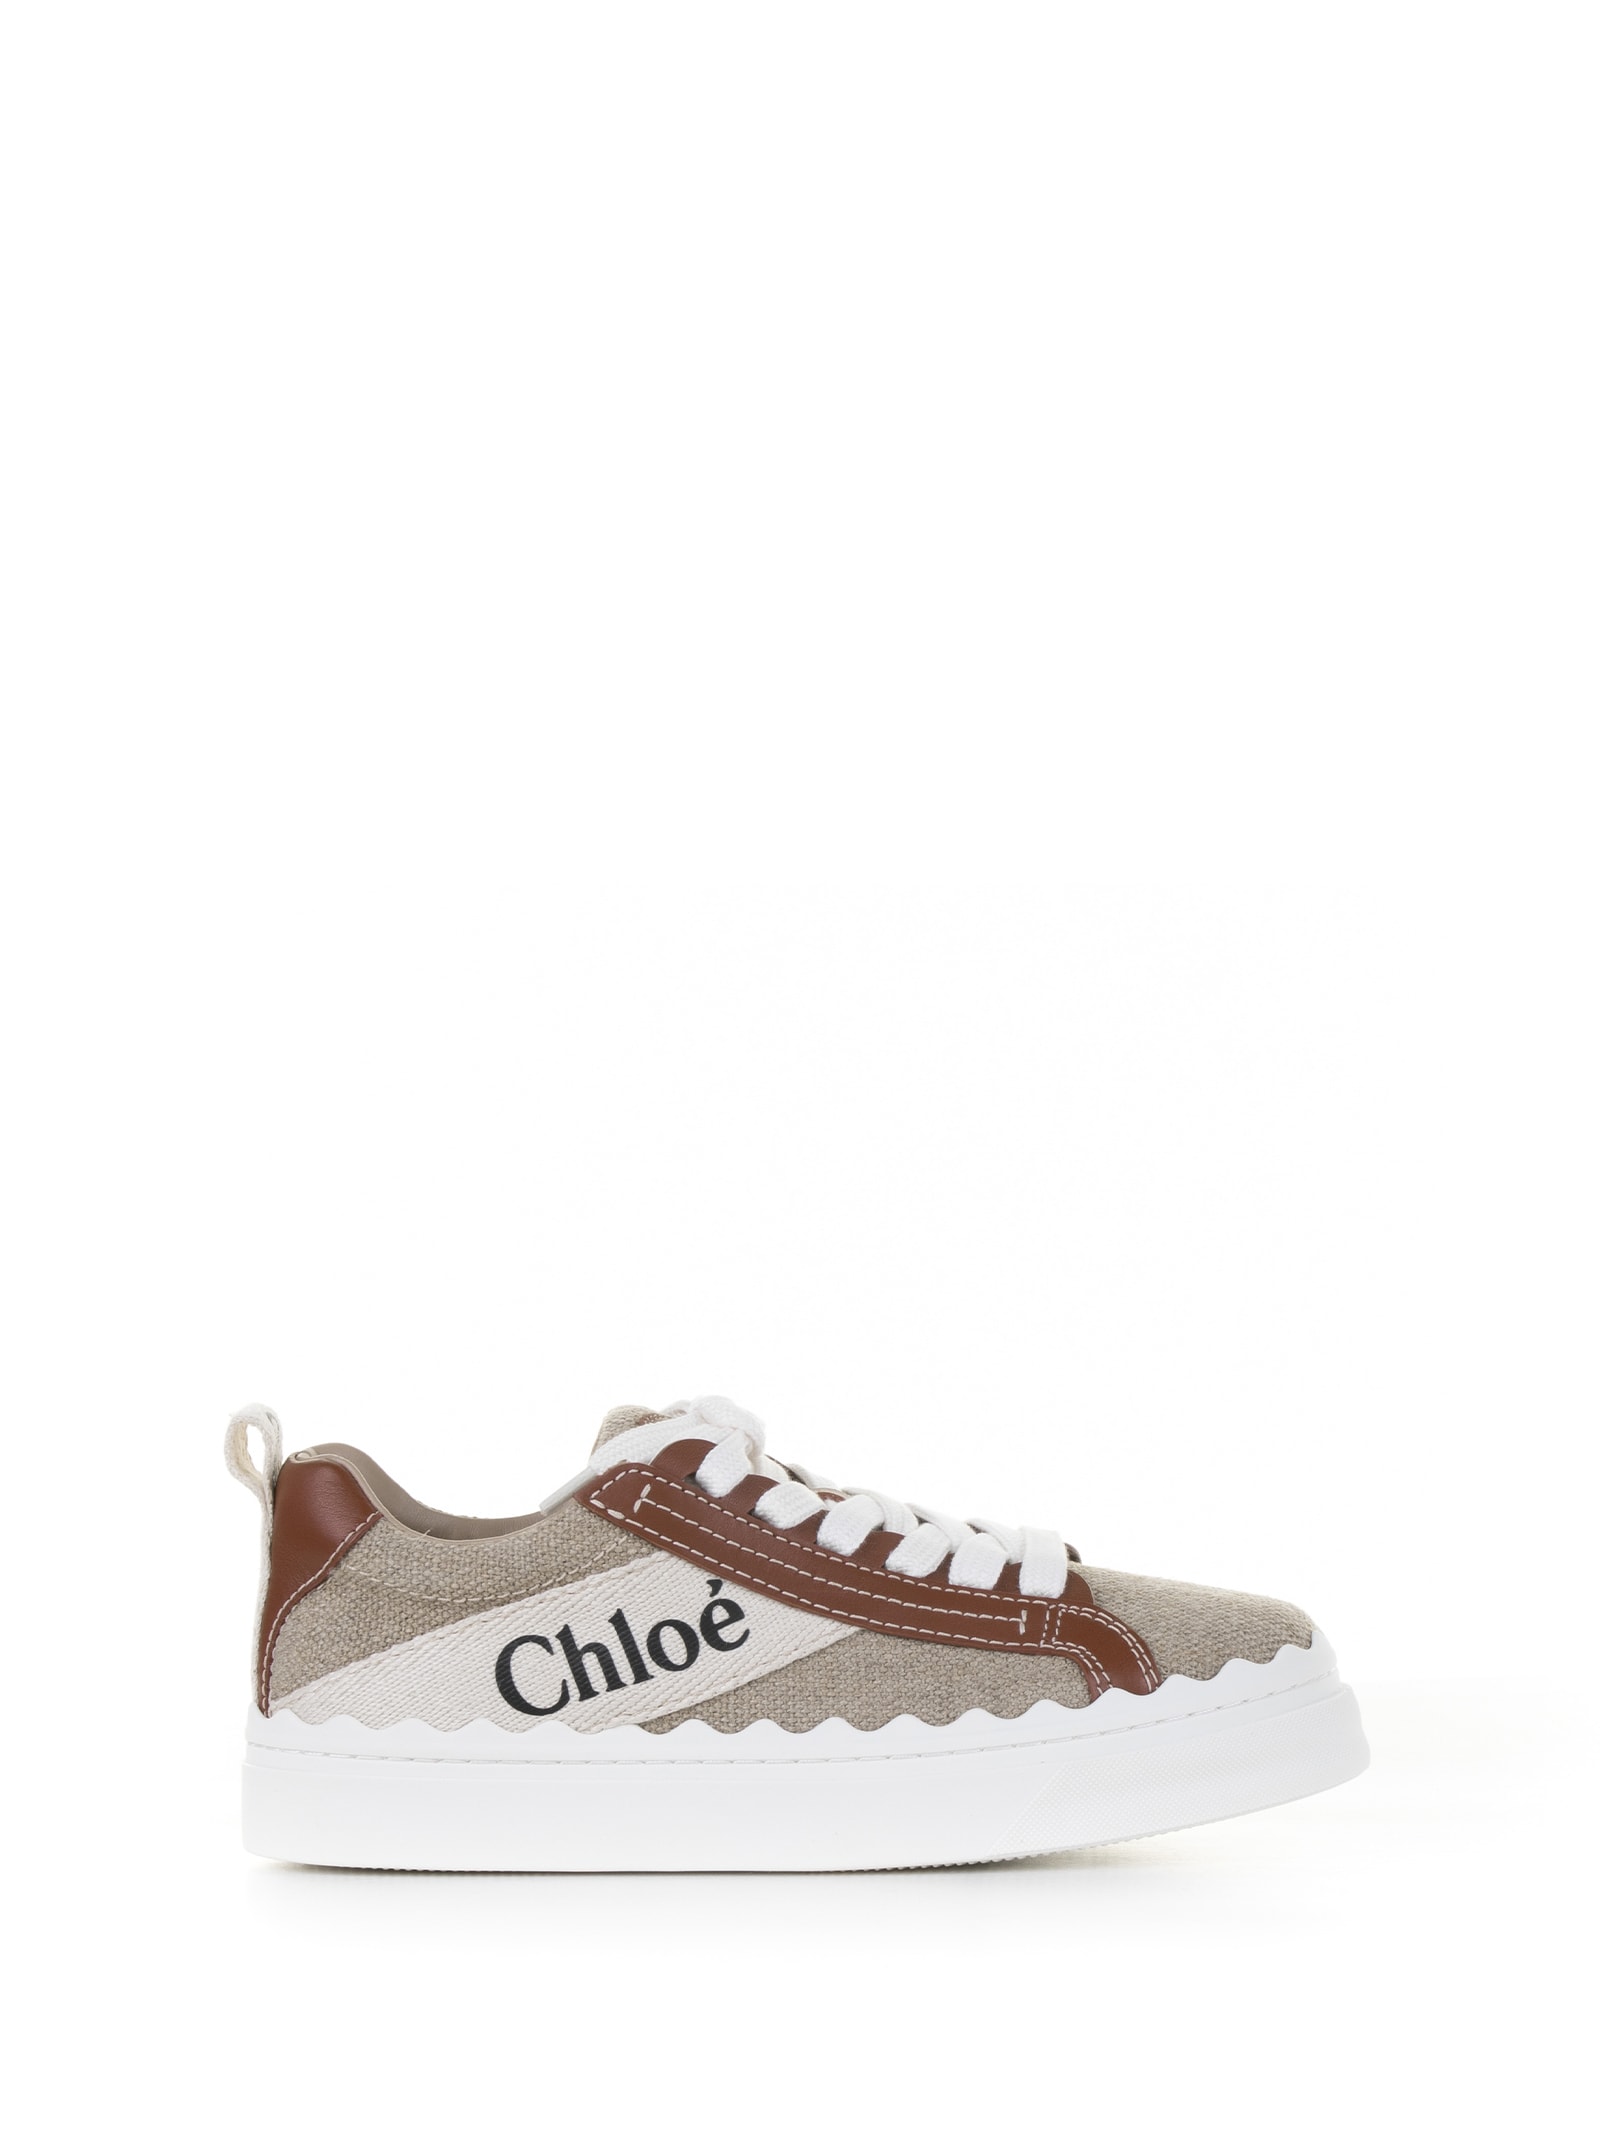 Chloé Trainers In White Brown